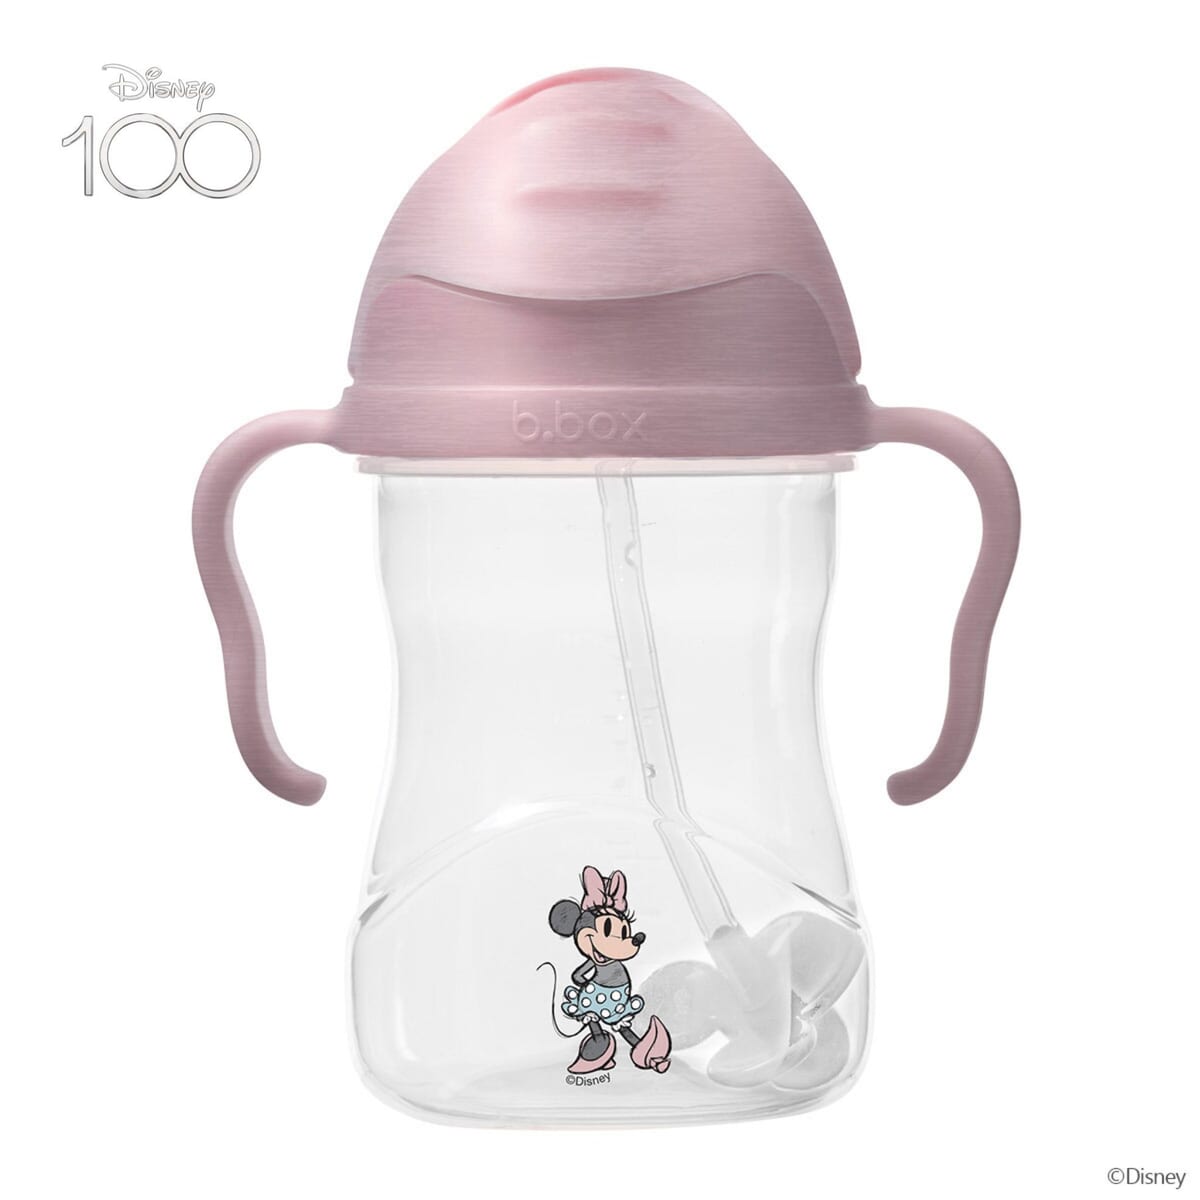 Disney Sippy cup ストローマグ シッピーカップ - Minnie (限定ミニー)